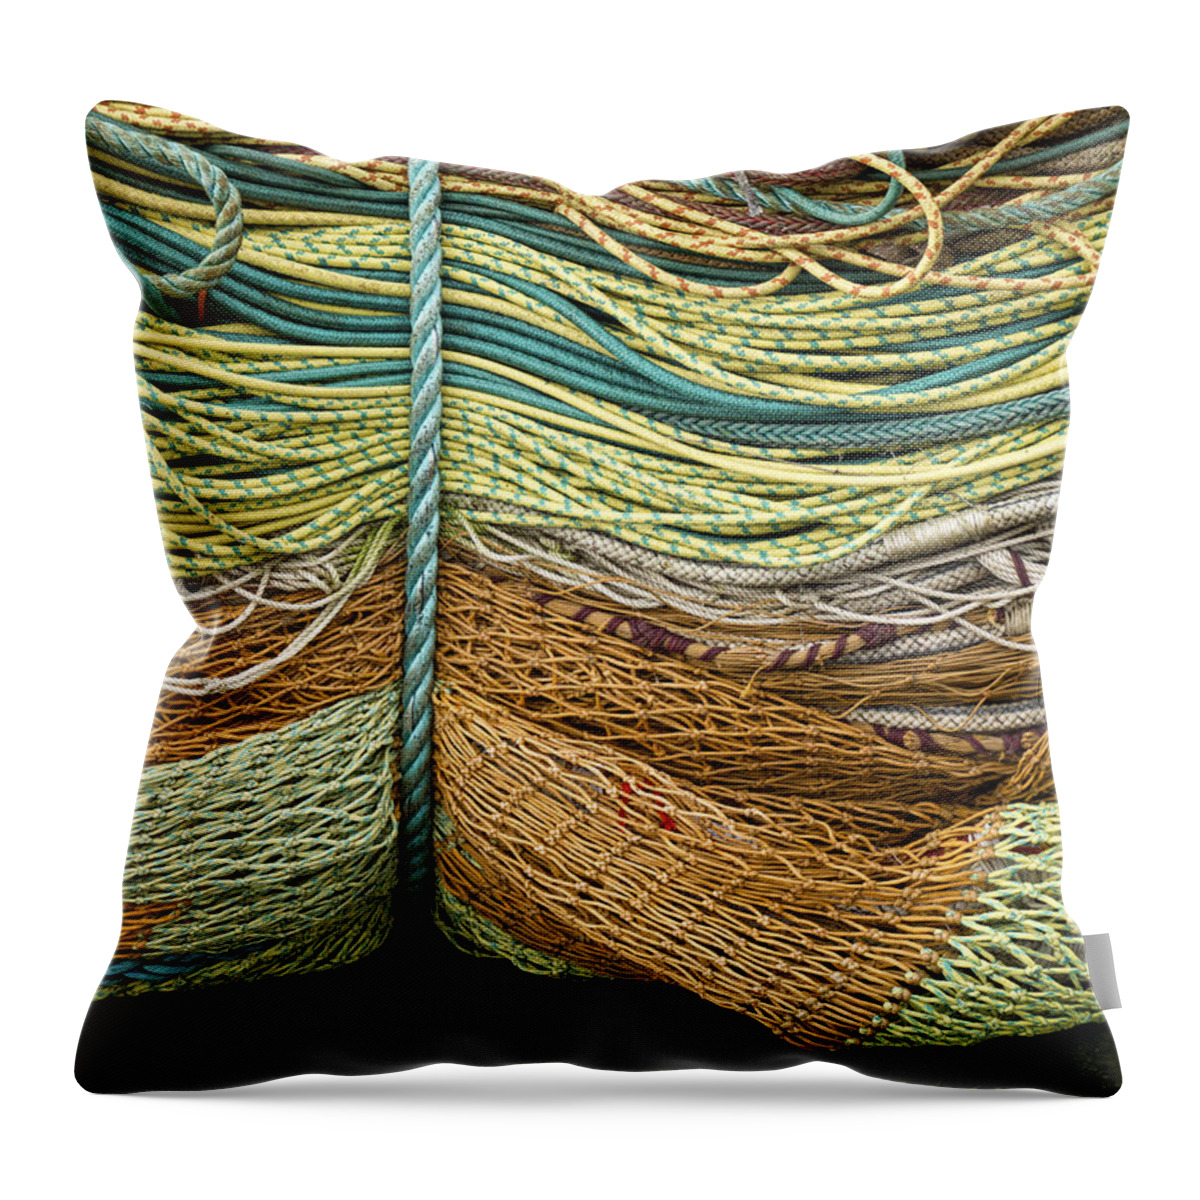 Fishing Throw Pillow featuring the photograph Bundle of Fishing Nets and Ropes by Carol Leigh